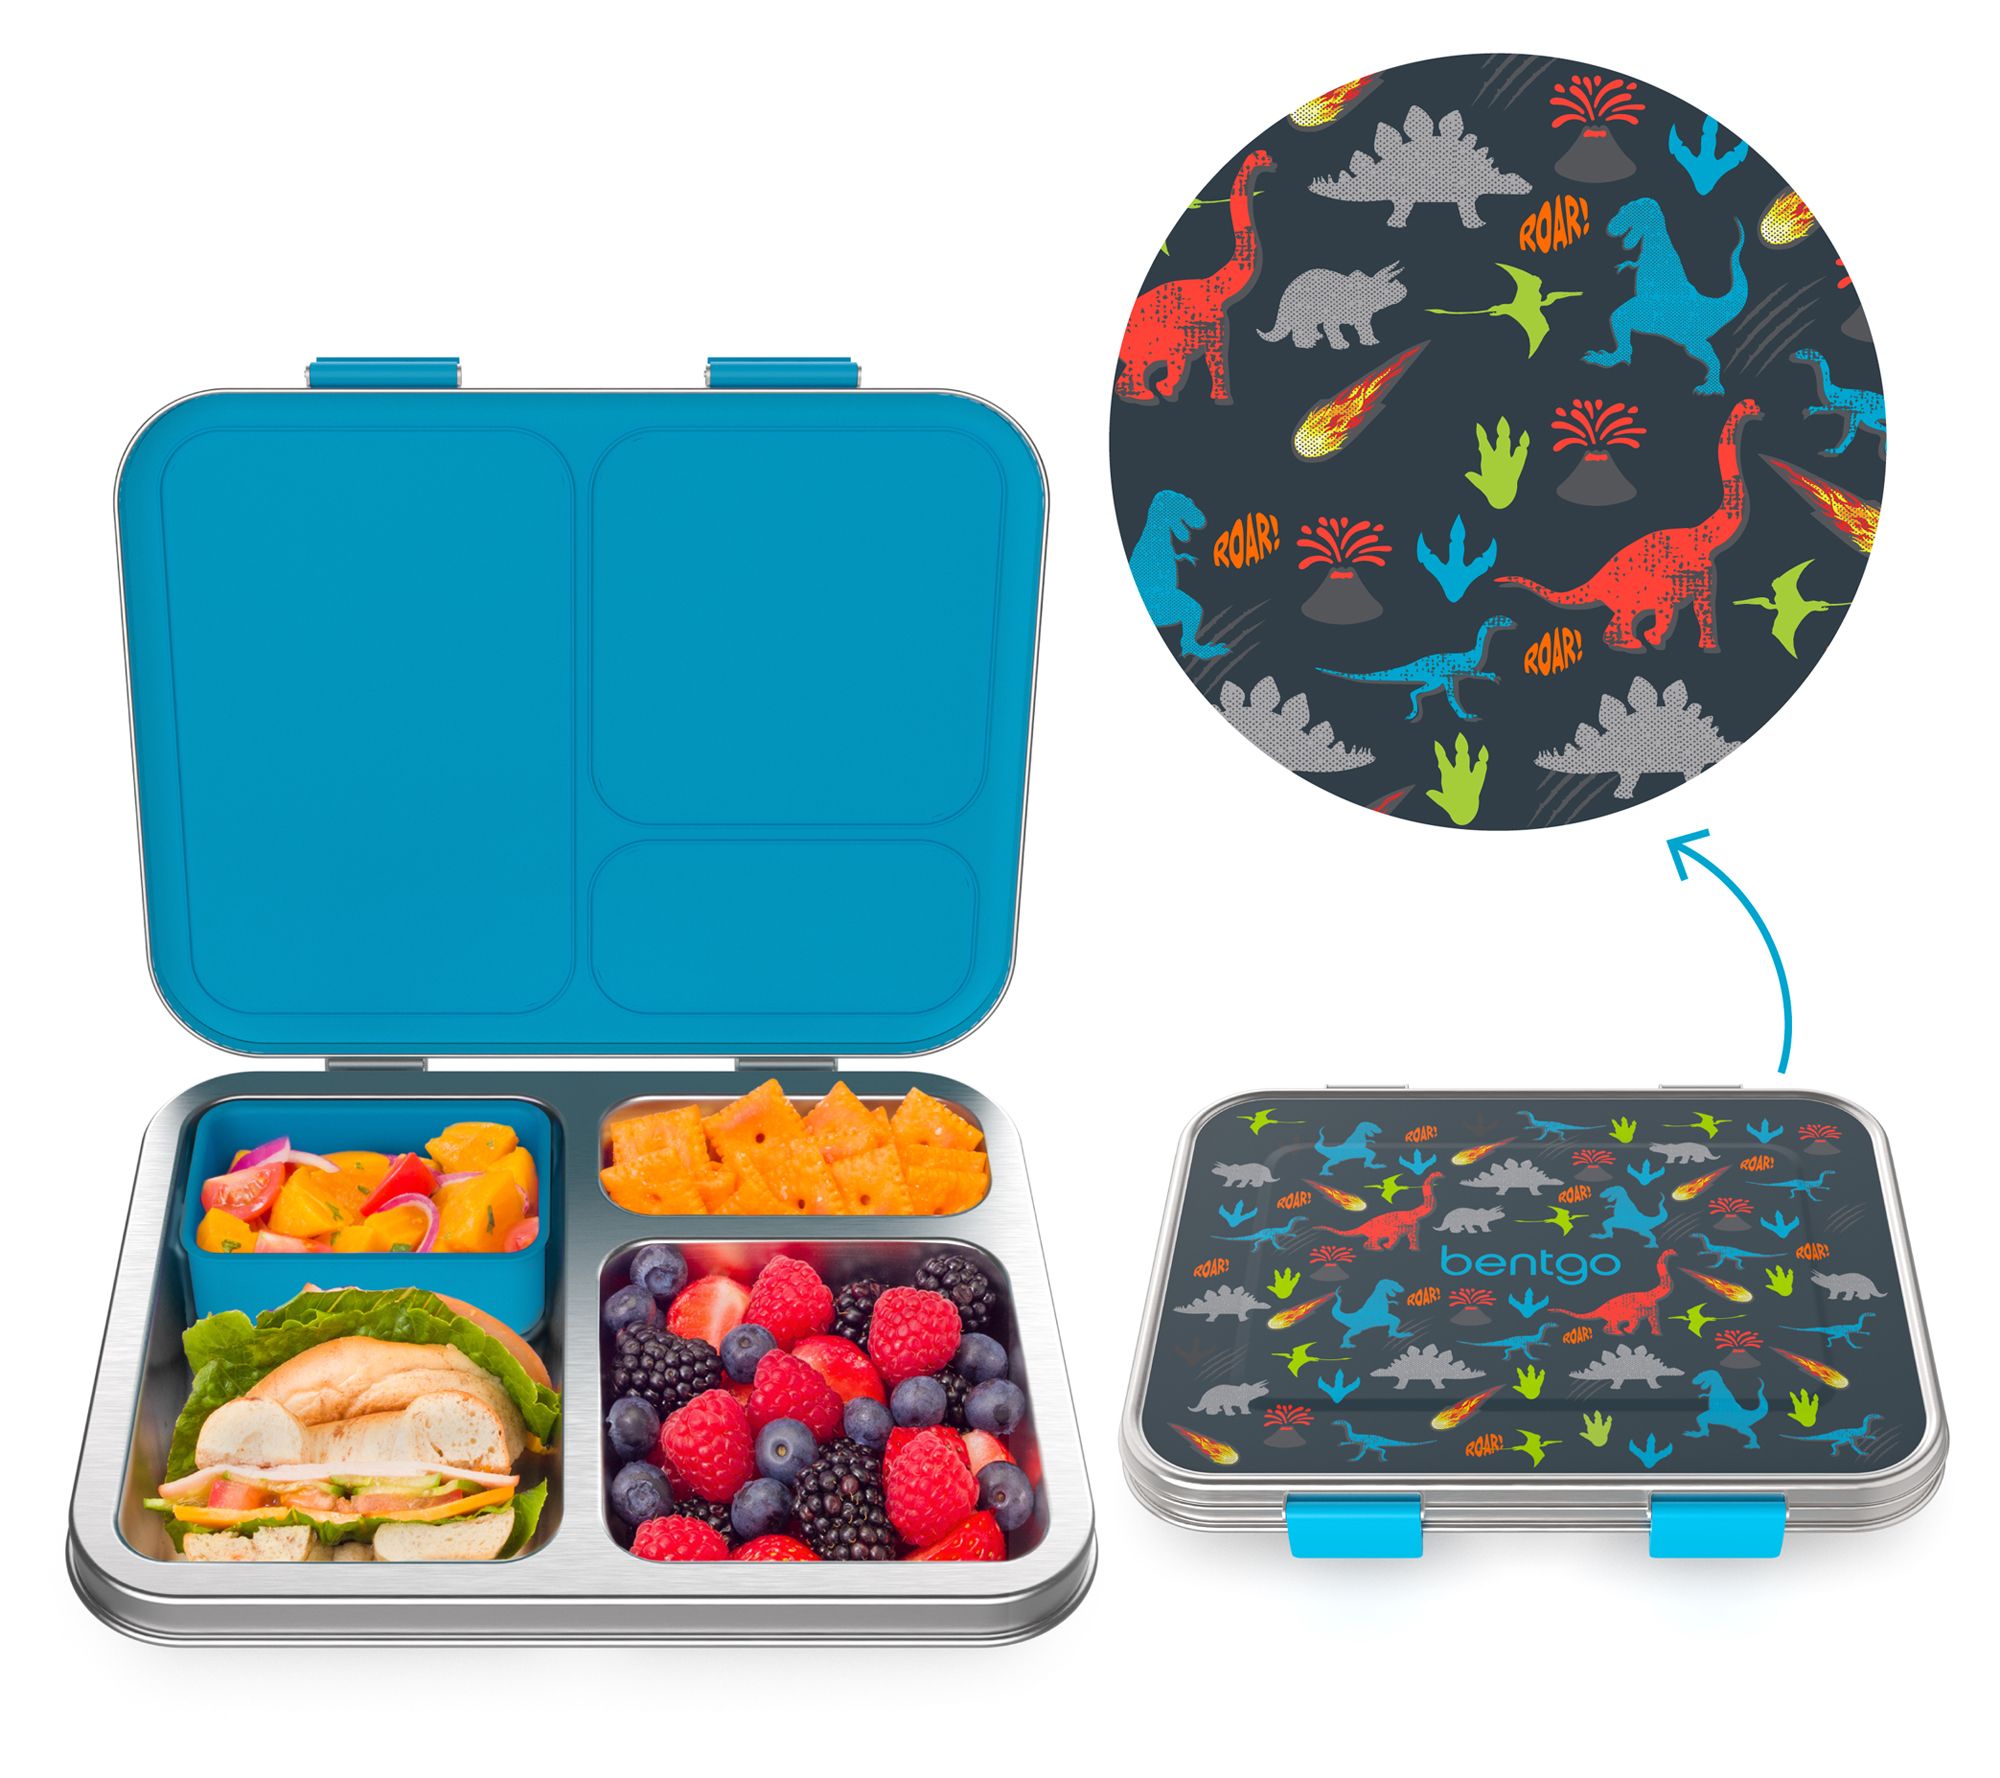 Bentgo Prints Insulated Lunch Bag Set With Kids Bento-Style Lunch Box  (Dinosaur)